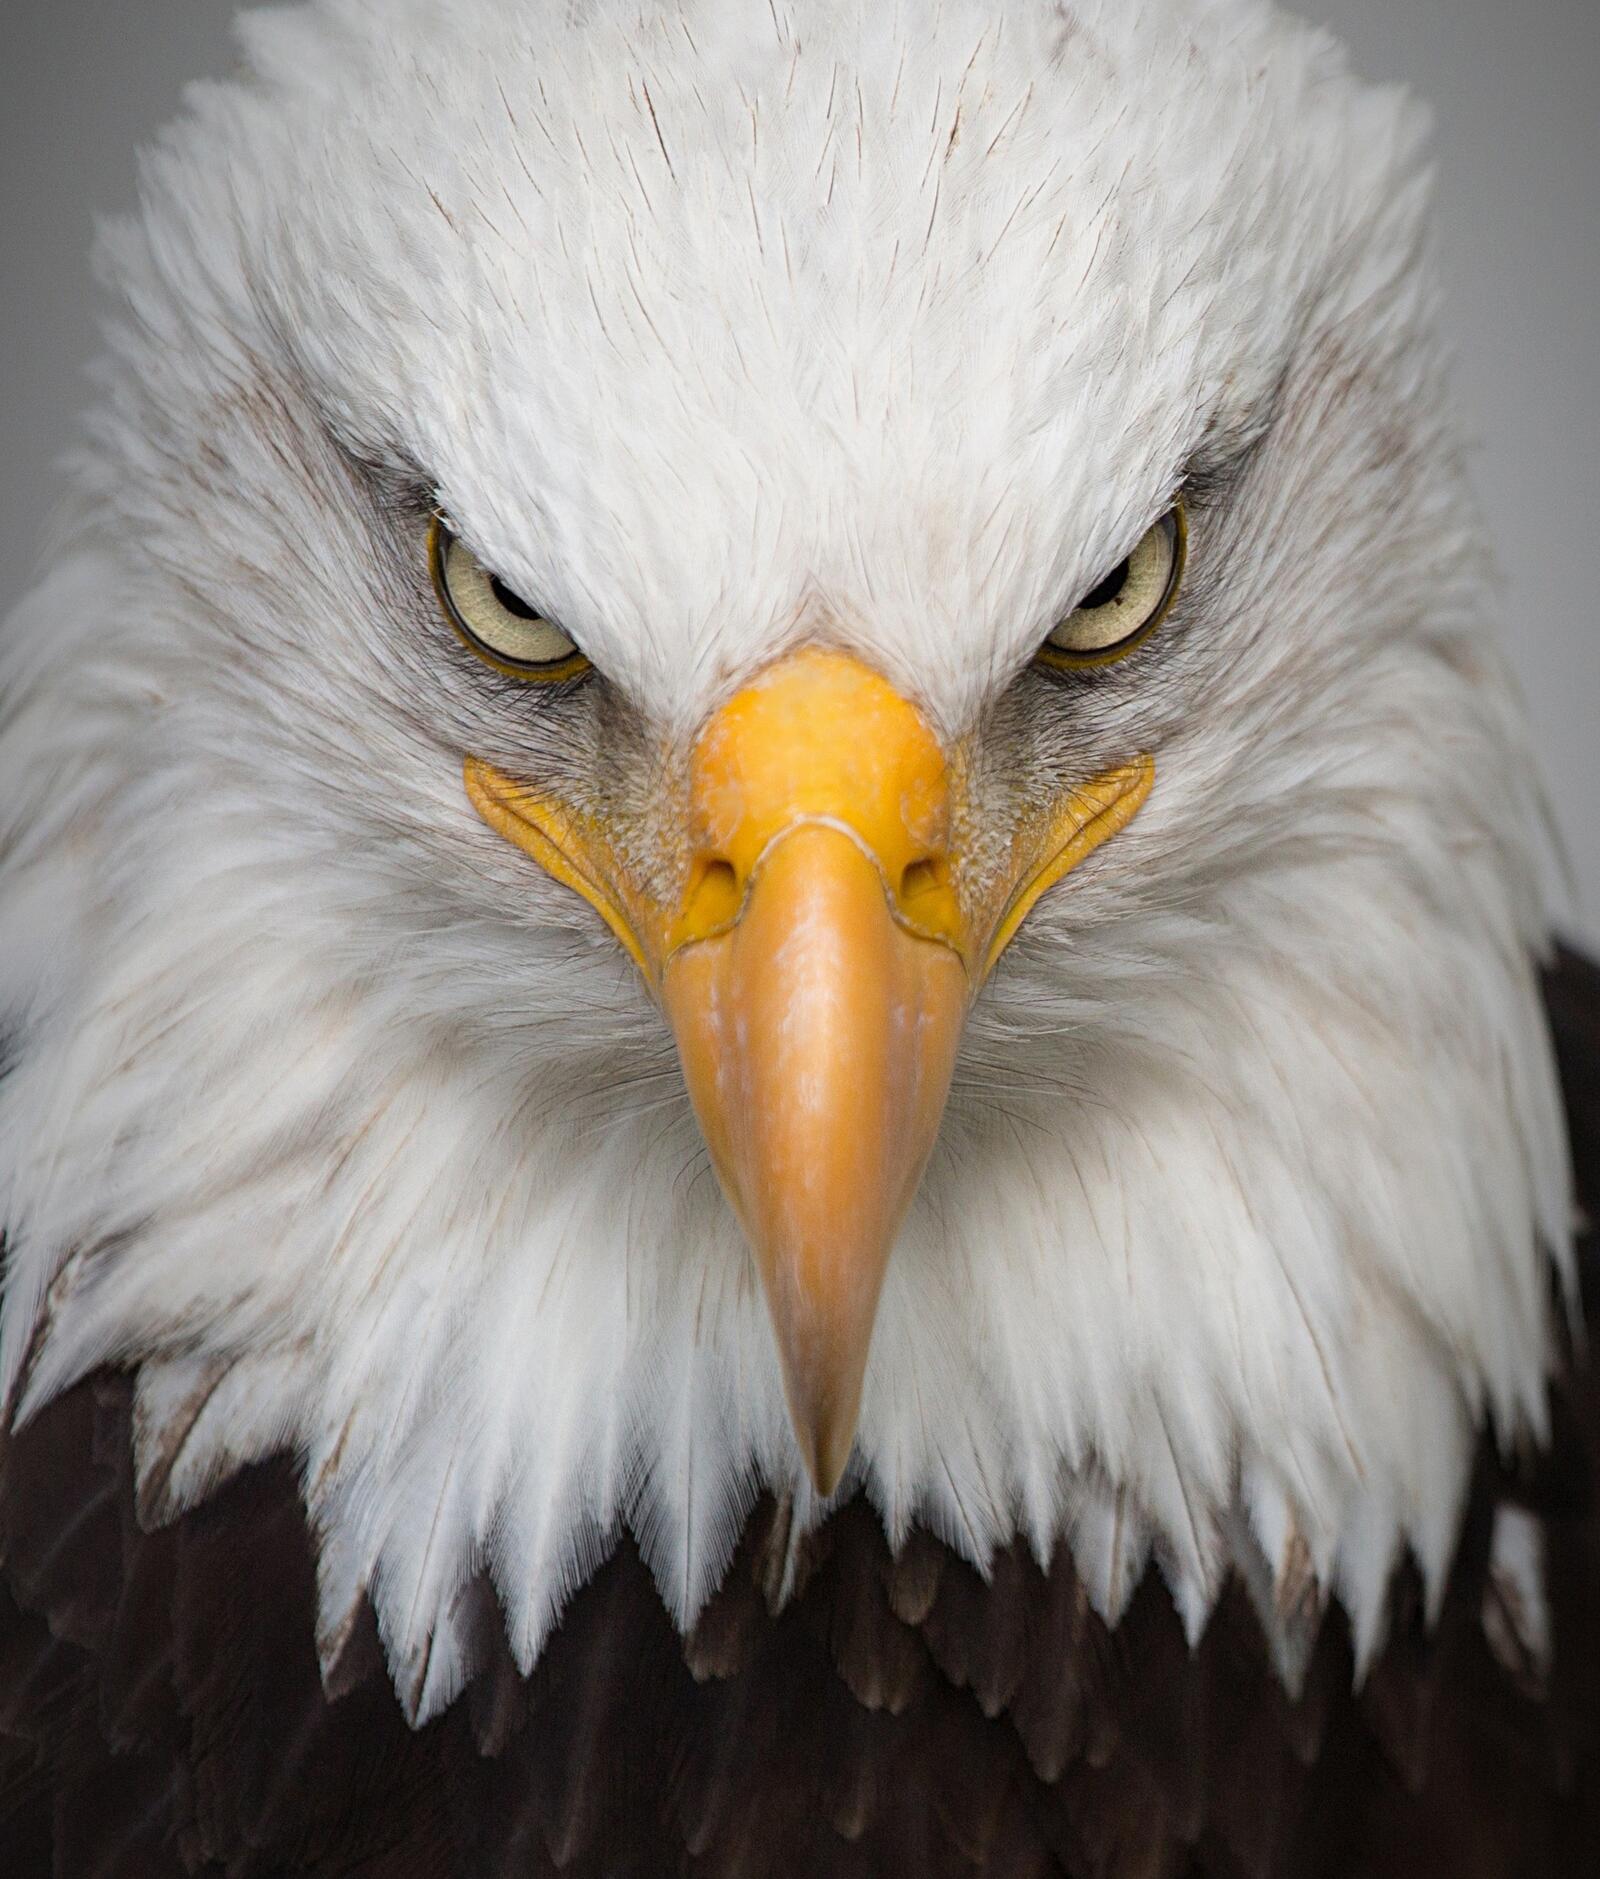 Free photo A close-up portrait of an eagle stares at the viewer